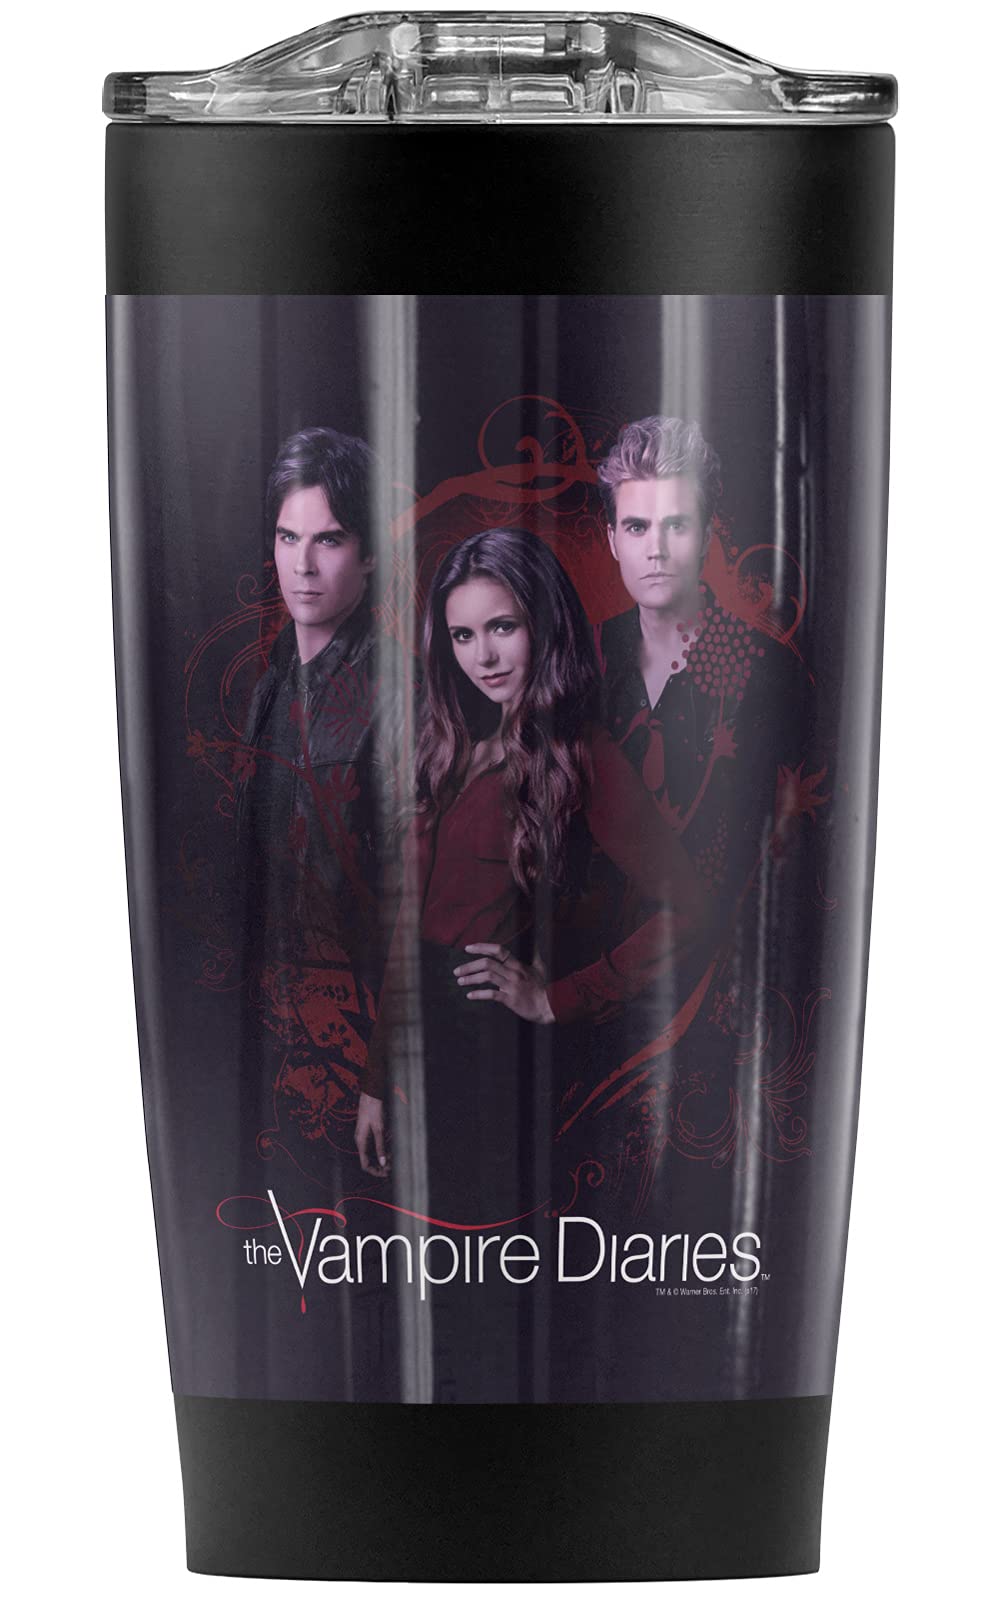 Logovision Vampire Diaries Company of Three Stainless Steel Tumbler 20 oz Coffee Travel Mug/Cup, Vacuum Insulated & Double Wall with Leakproof Sliding Lid | Great for Hot Drinks and Cold Beverages